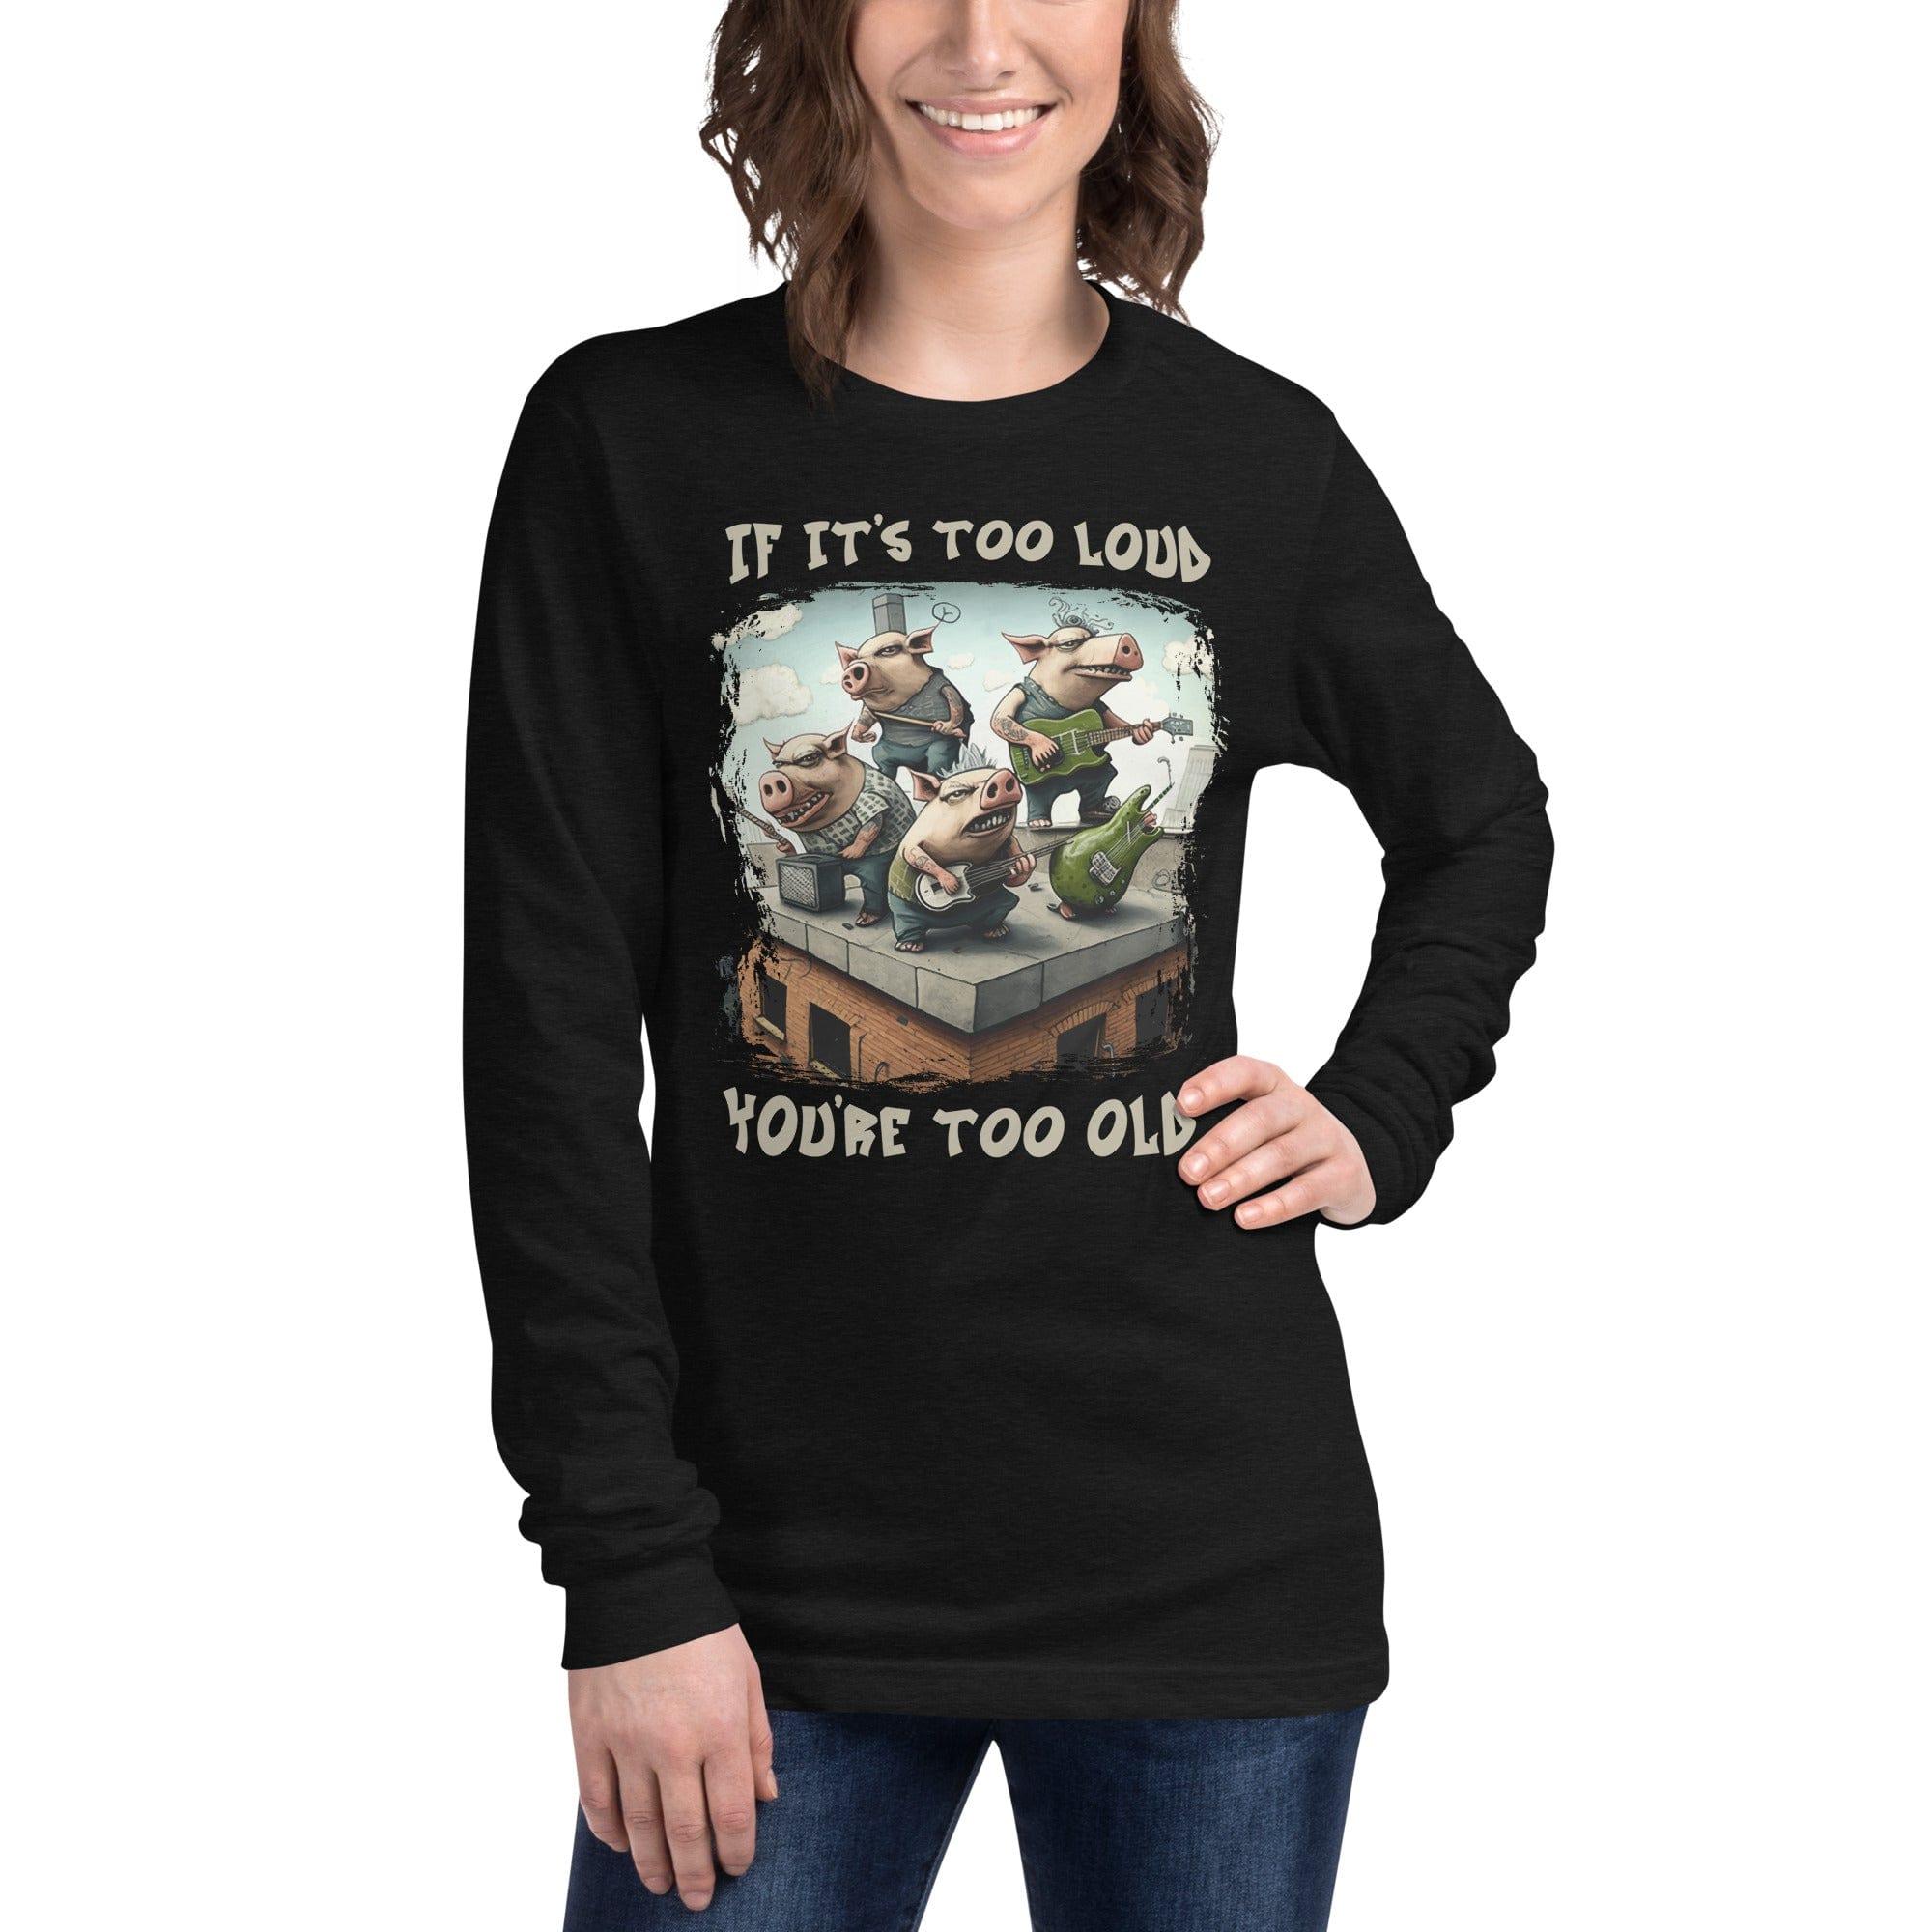 You're Too Old Unisex Long Sleeve Tee - Beyond T-shirts